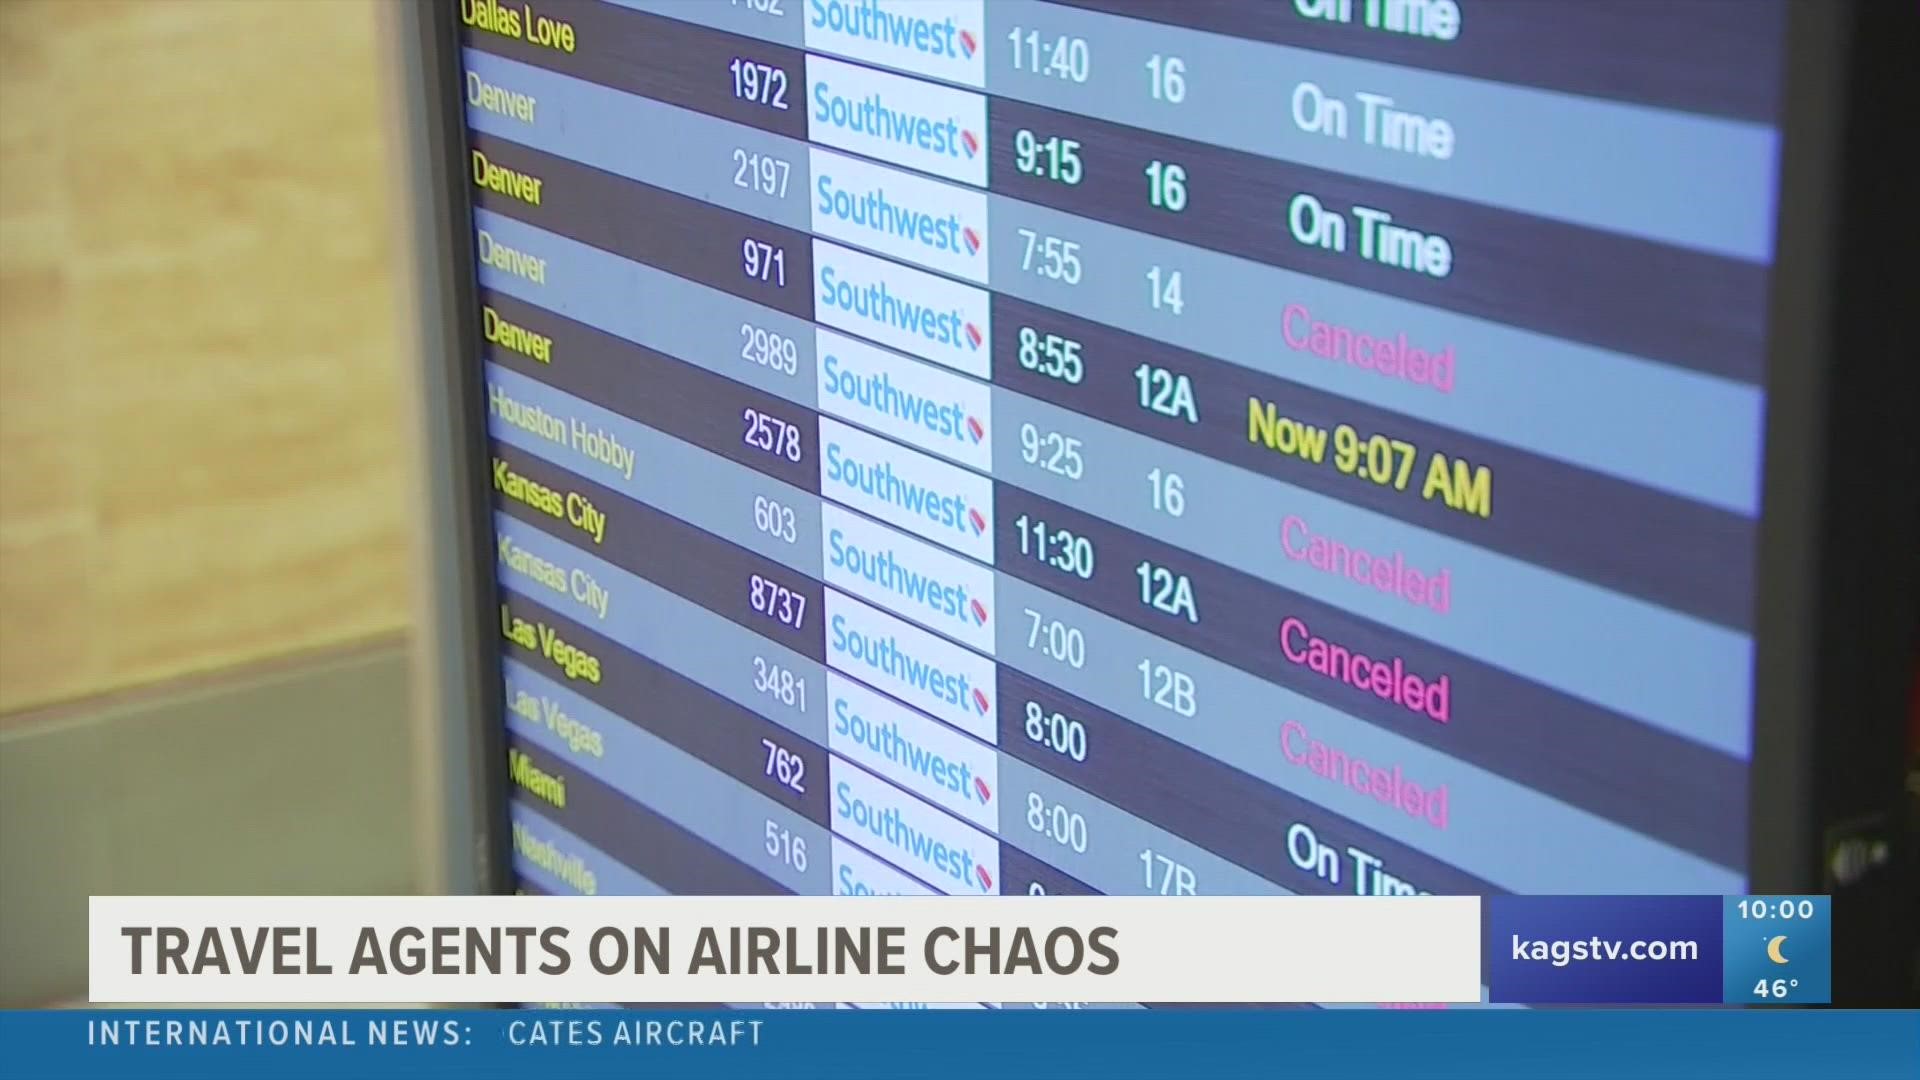 Many travelers are stranded as airlines have canceled thousands of flights across the country.